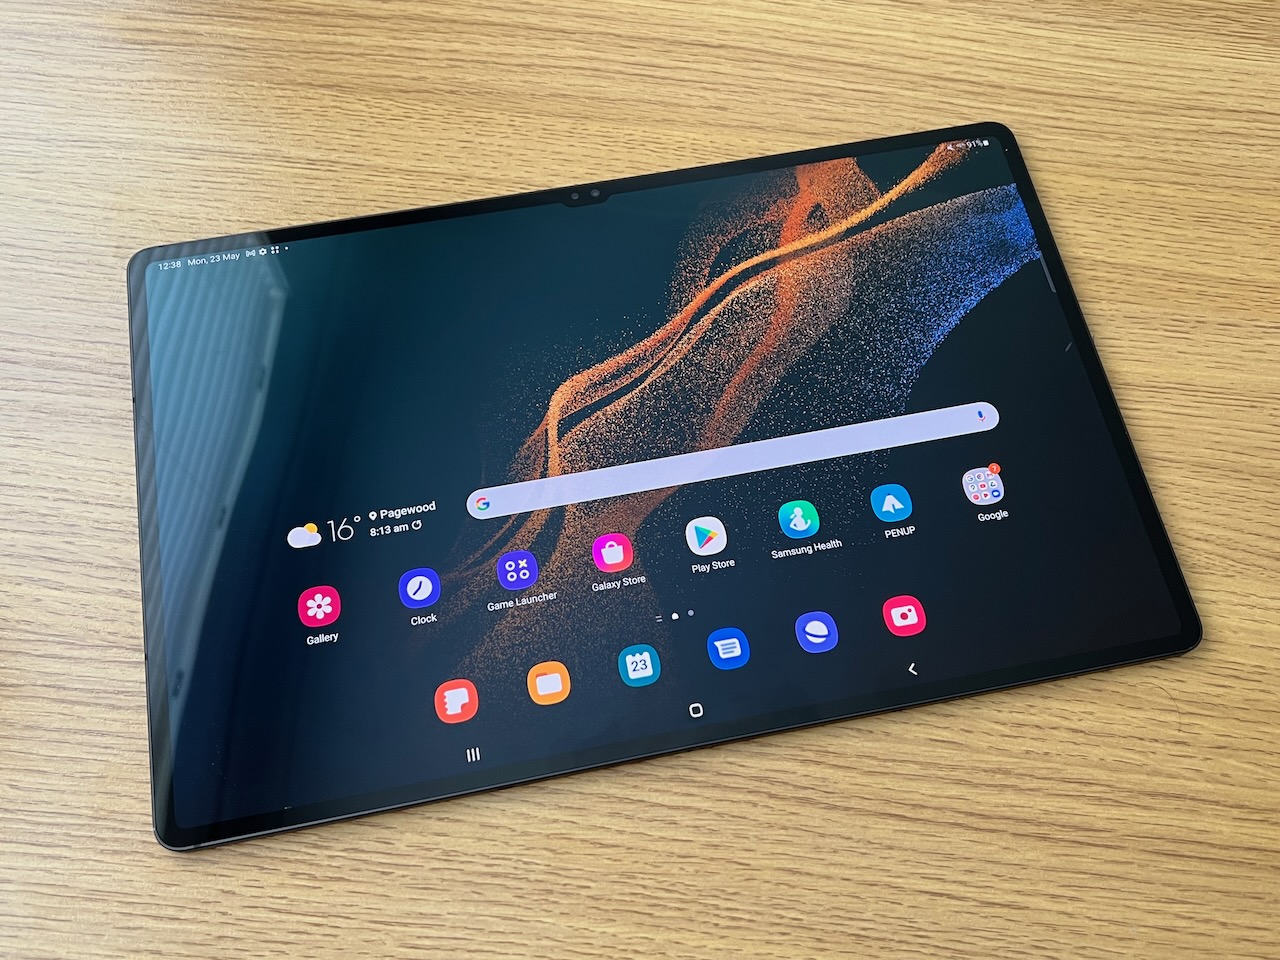 SamsungTabS8UltraReview4